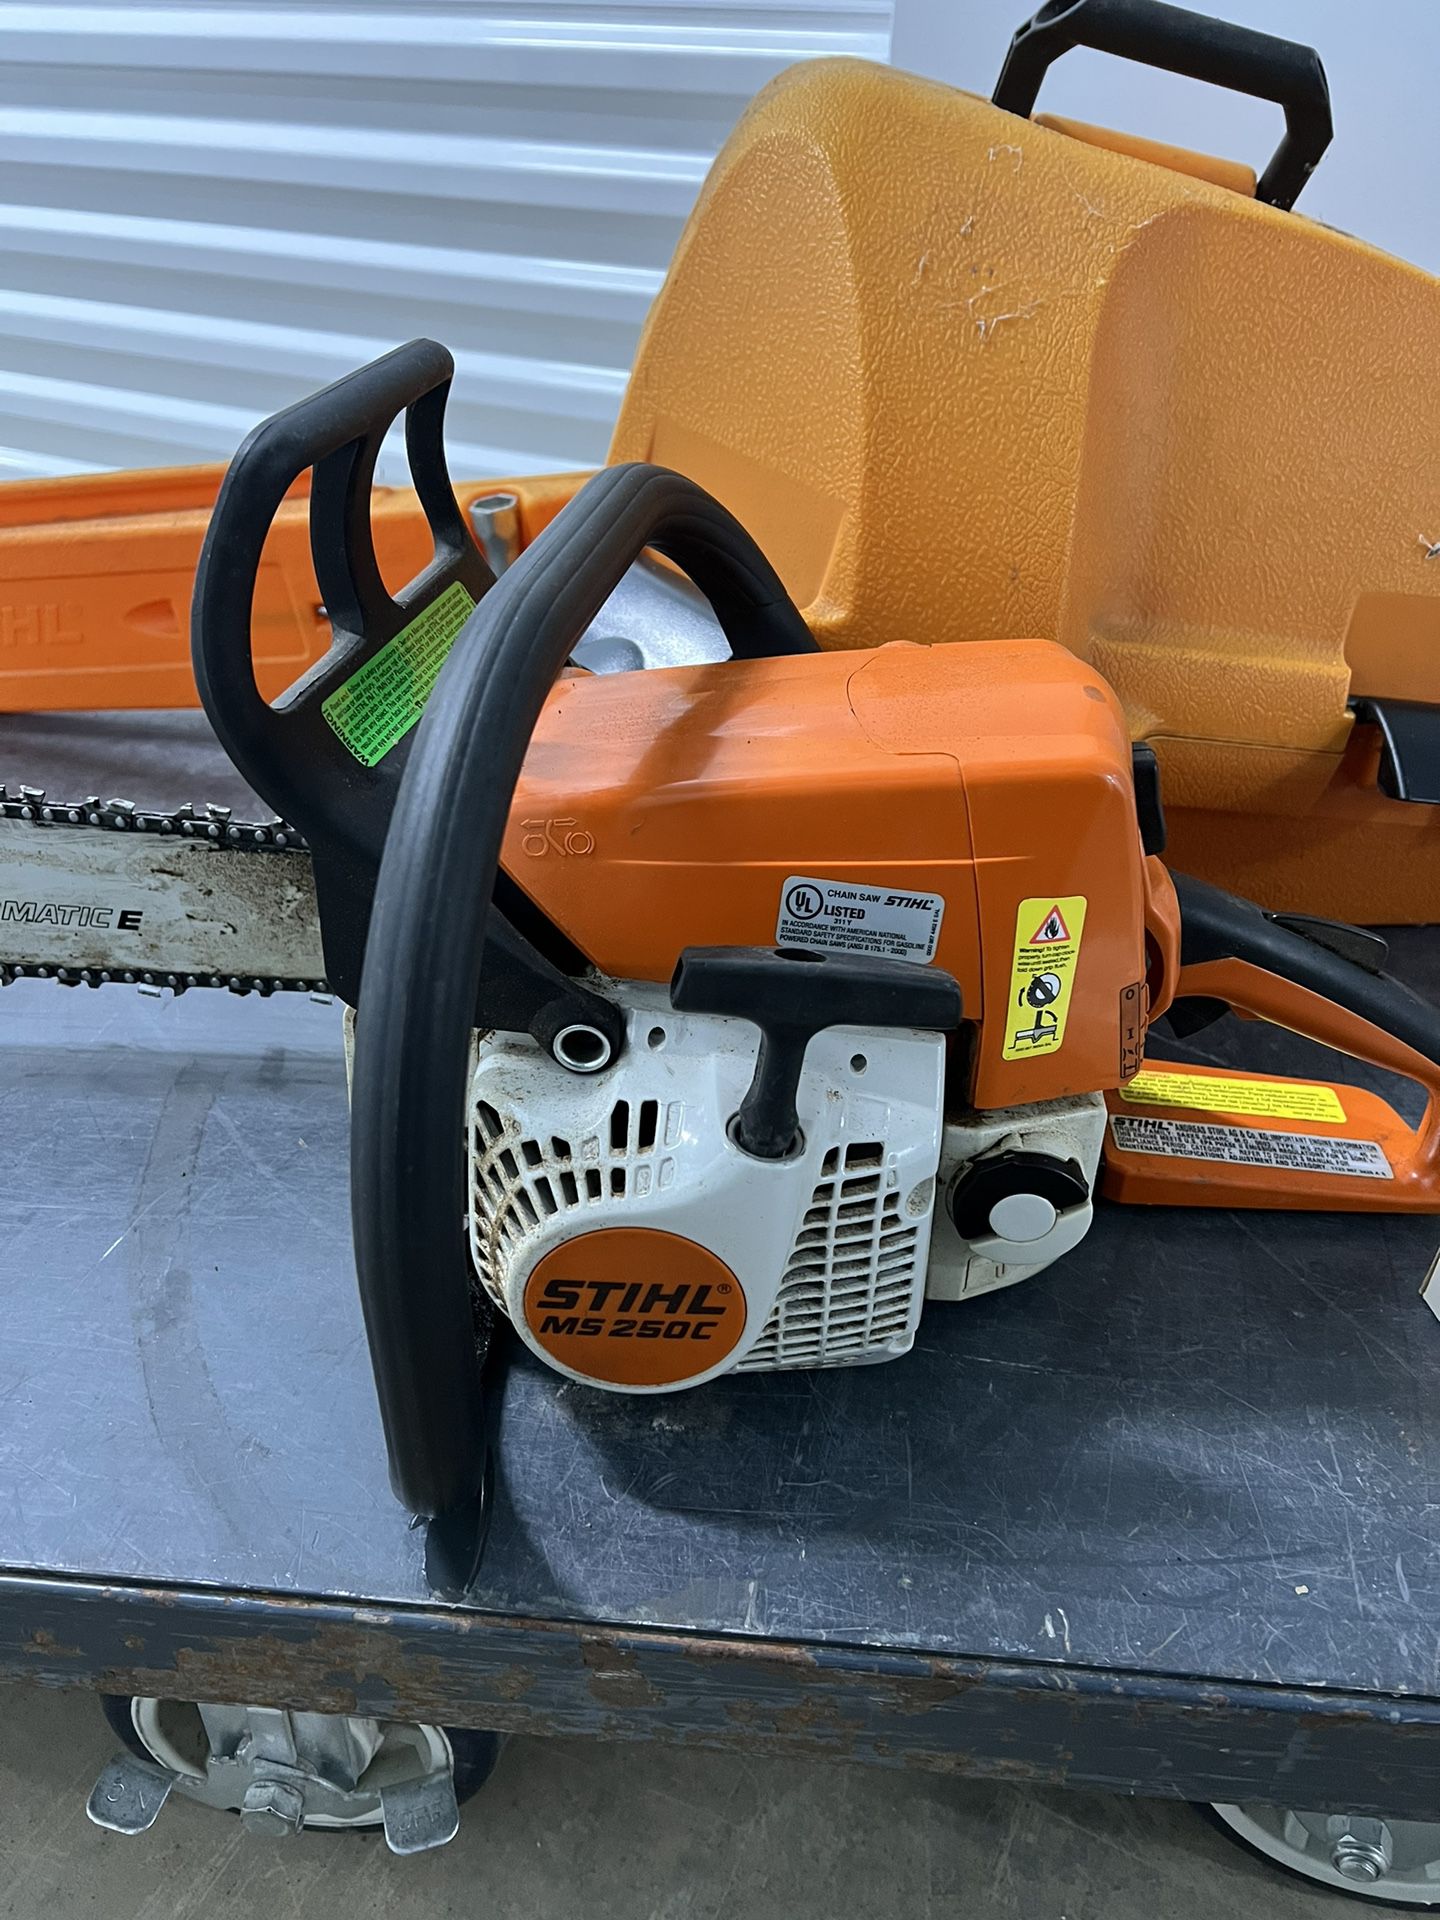 STIHL MS 250C Chainsaw W/ 2 Extra Chaind for Sale in Federal Way 